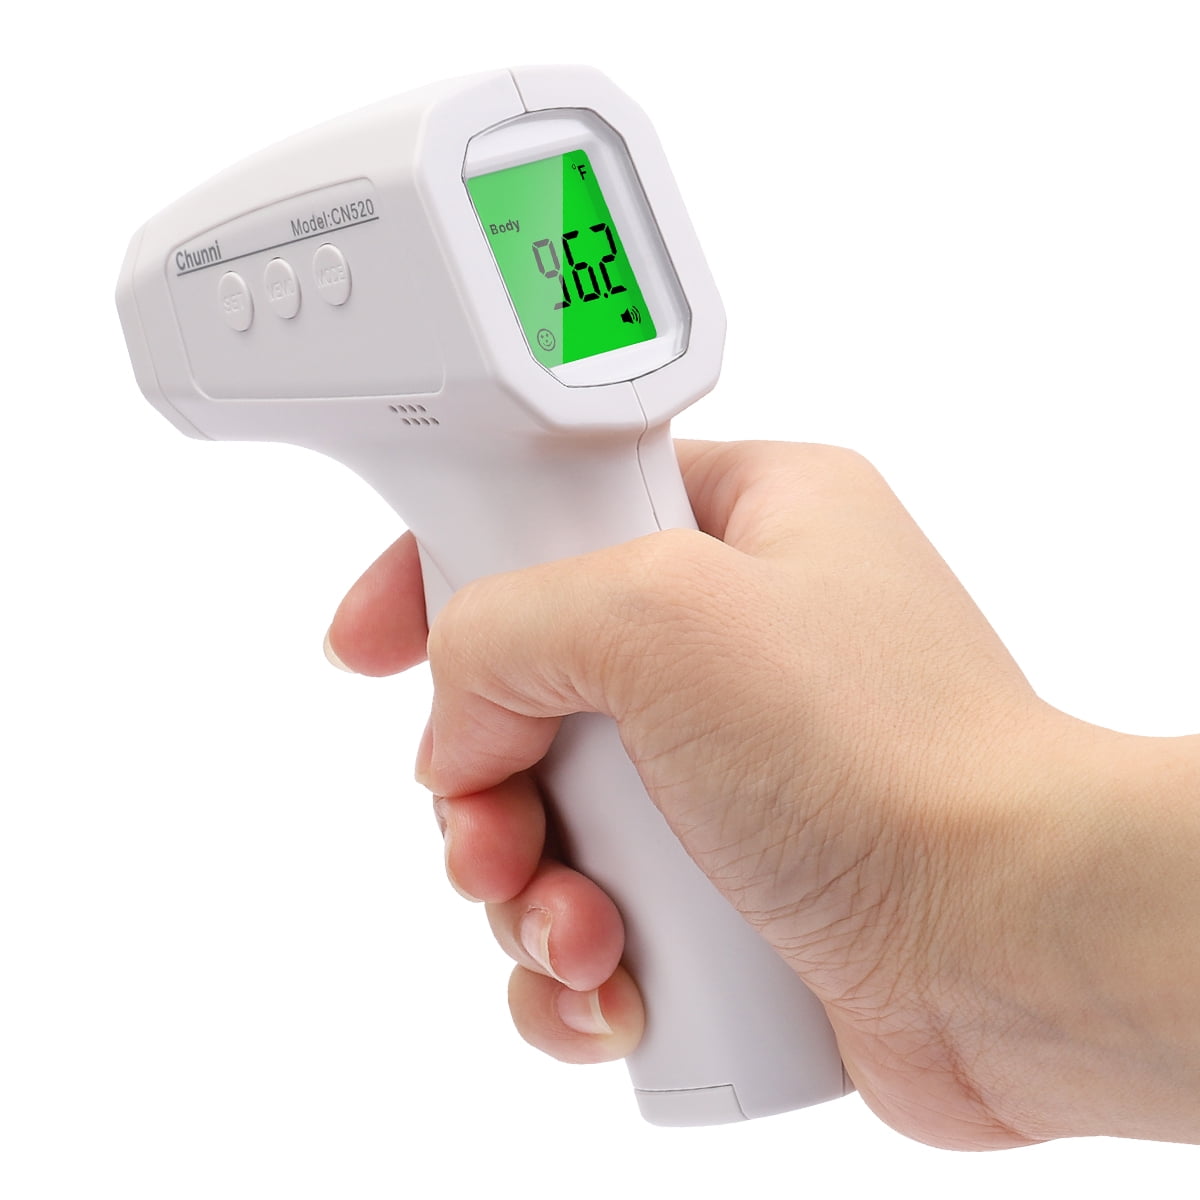 2 pack of Digital Infrared Thermometers Instant Accurate Result NonContact Scan 